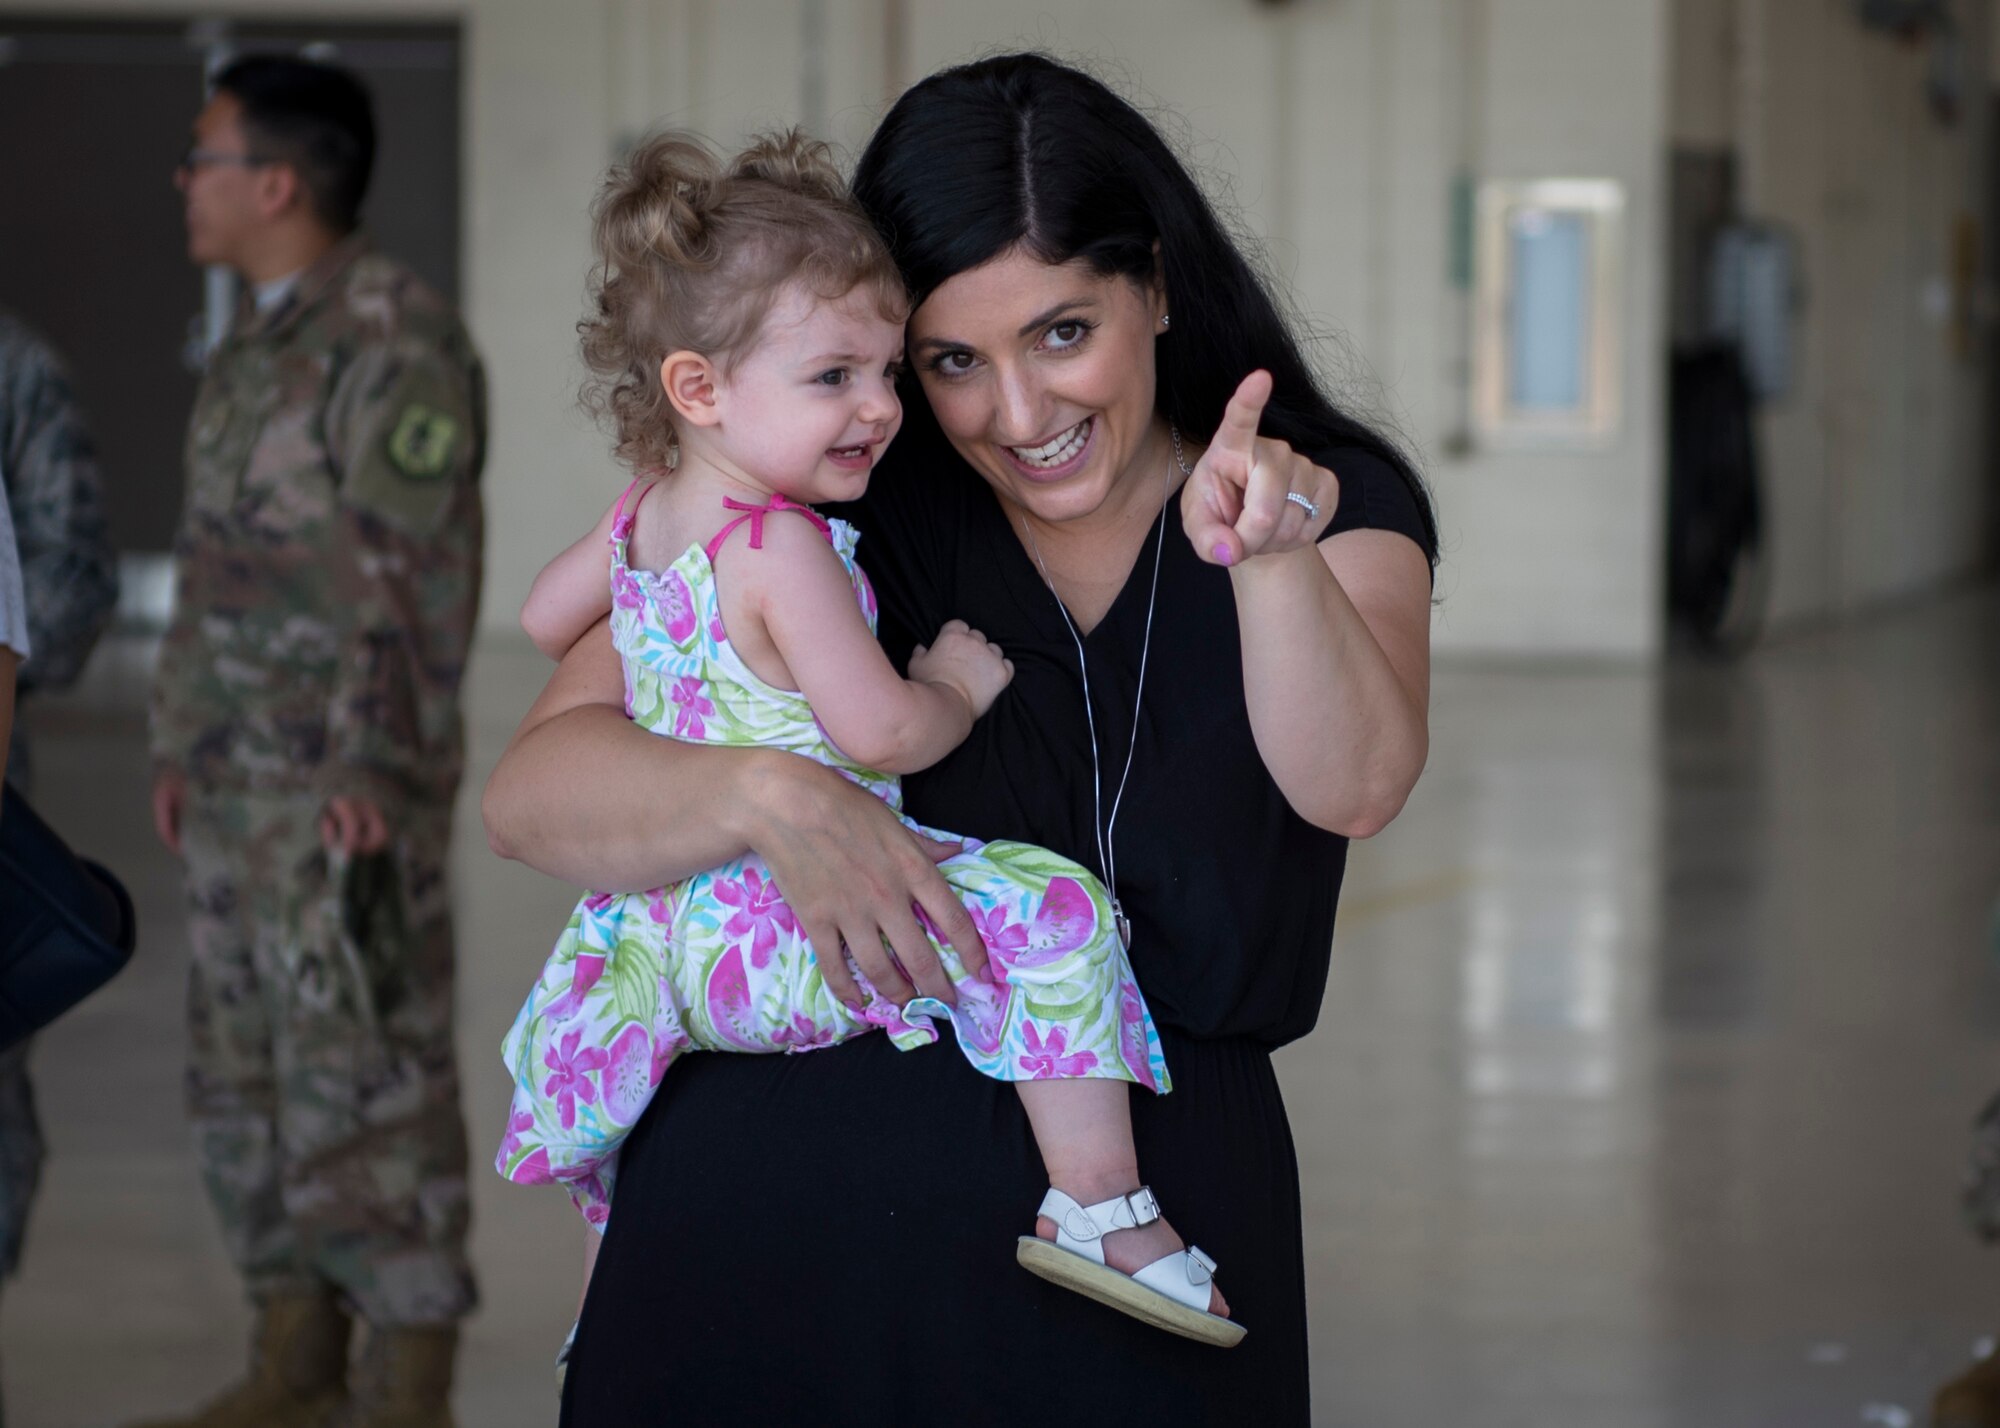 Family and friends await the arrival of their loved ones during the 41st Rescue Squadron’s (RQS) redeployment ceremony, July 10, 2018, at Moody Air Force Base, Ga. While deployed, the 41st RQS and the 41st Helicopter Maintenance Unit provided combat search and rescue capabilities and maintenance operations in support of Combined Joint Task Force-Horn of Africa. (U.S. Air Force photo by Airman Taryn Butler)